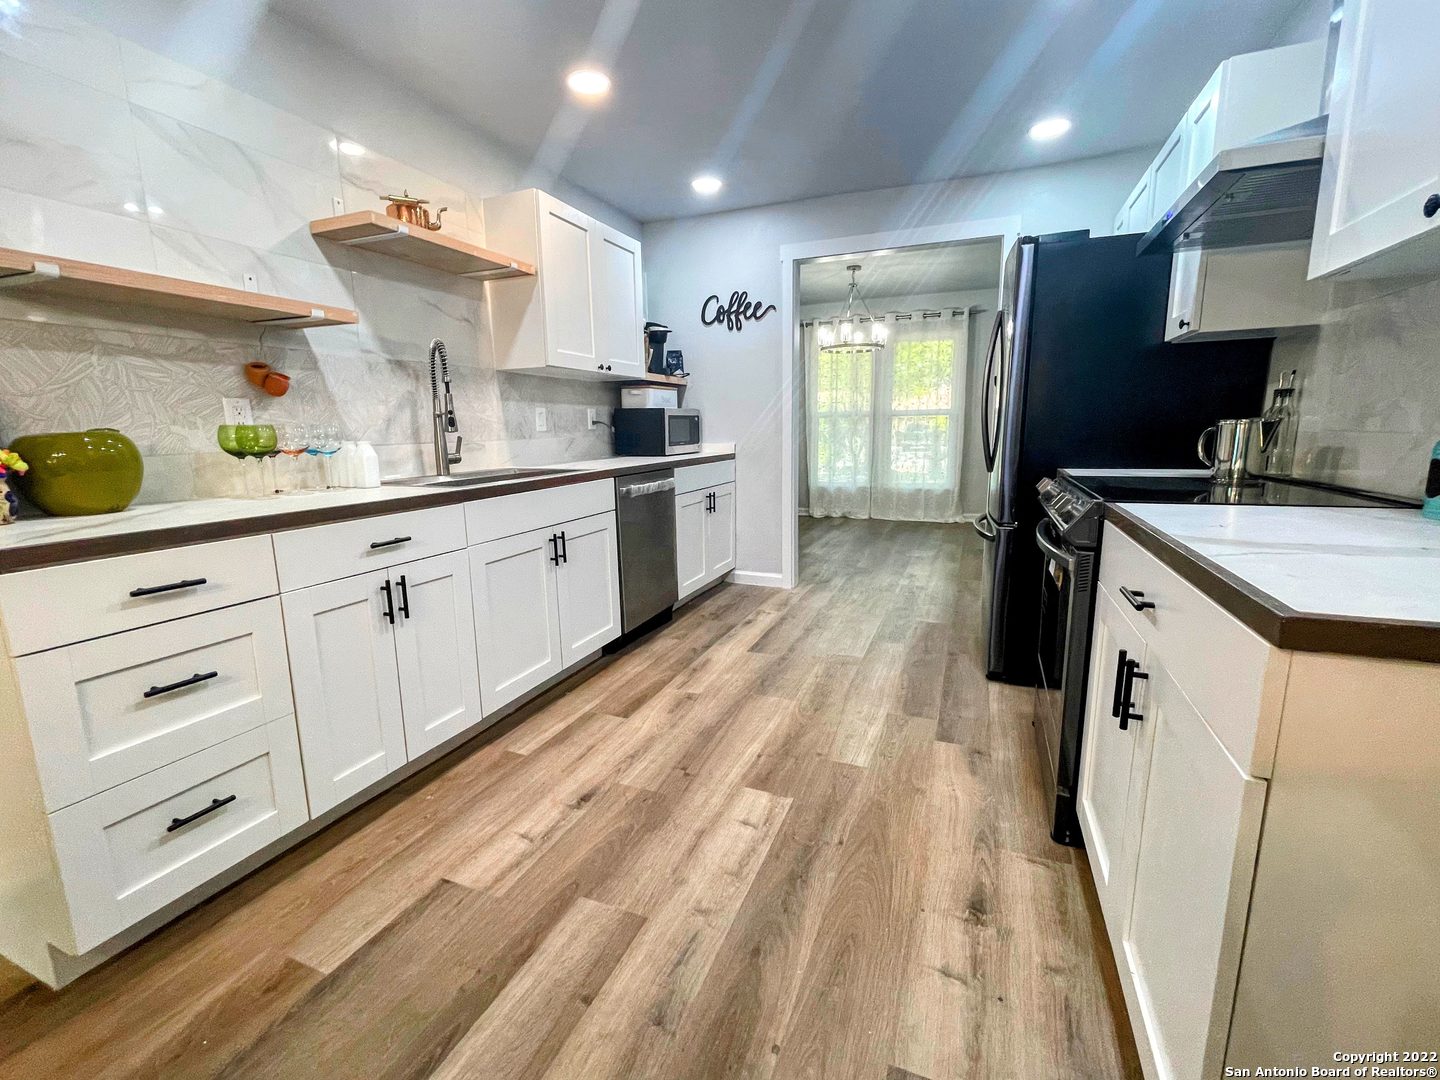 Show stopper just came on the market. Freshly remodeled with virtually everything brand new. All new appliances and beautiful luxury plank floors give this quiet home huge appeal. Almost a quarter acre with no HOA is hard to come across in the city so don't delay, this one won't last long.